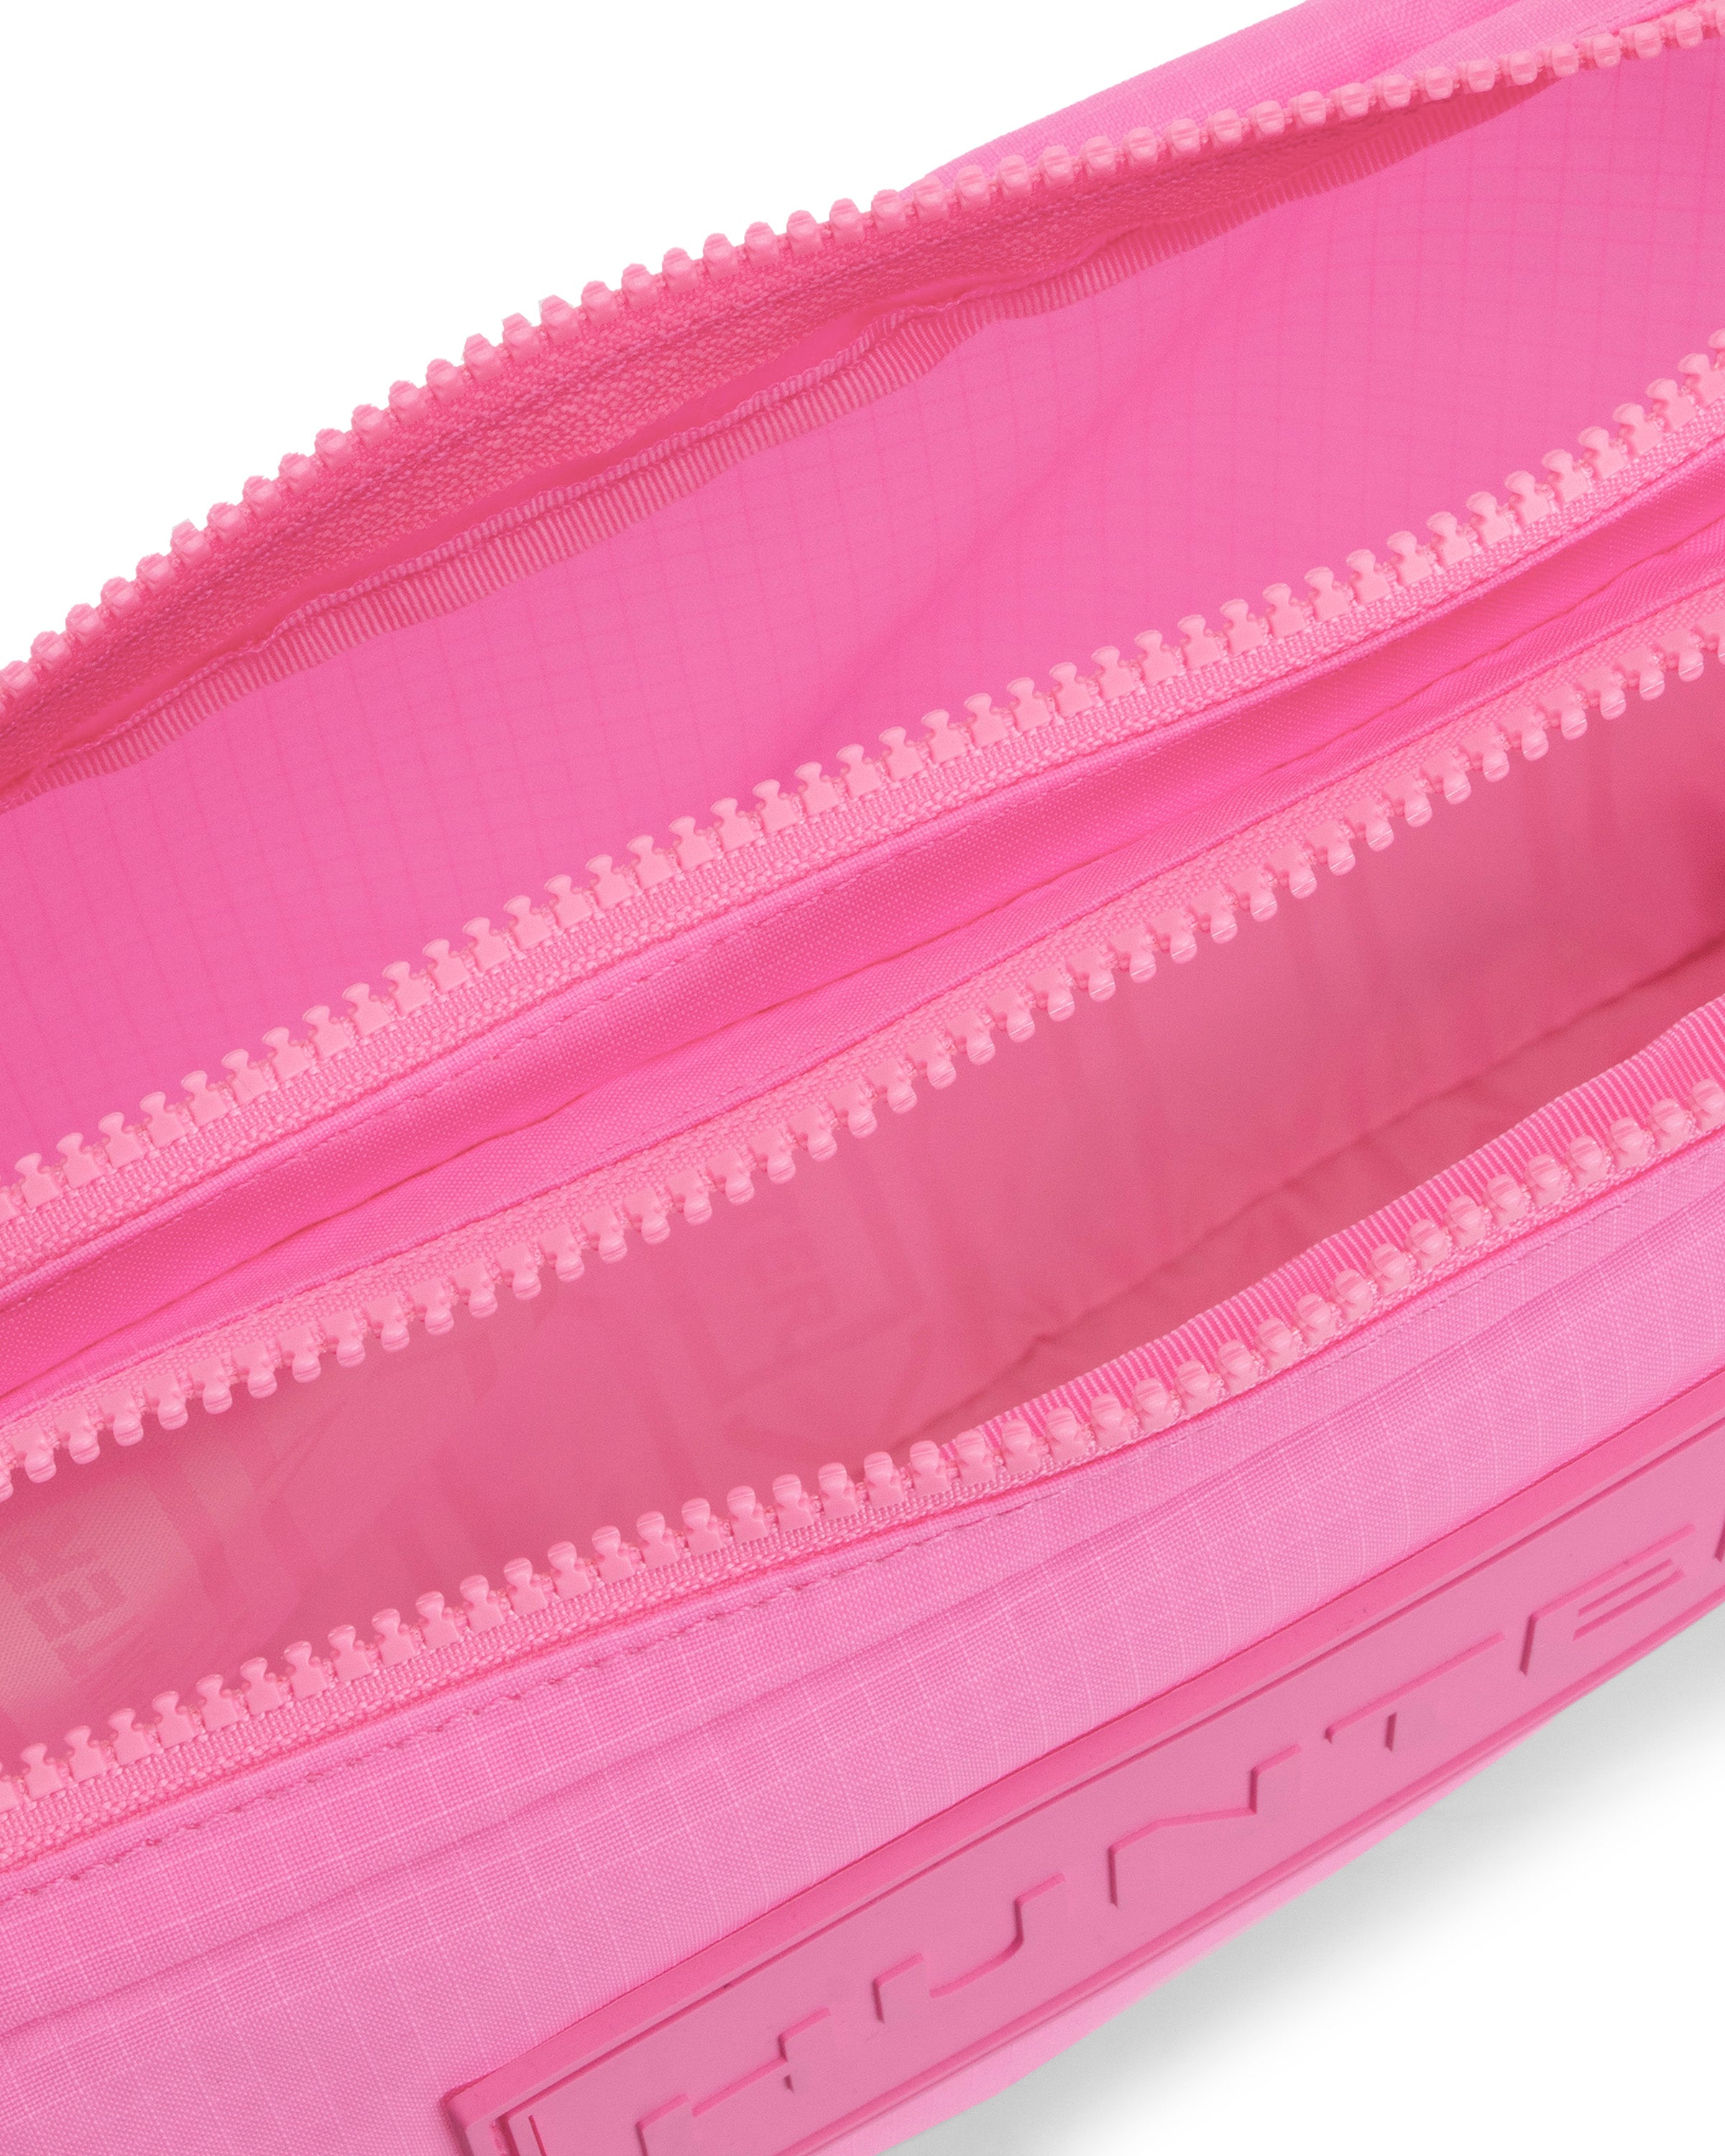 Travel Ripstop Recycled Nylon Sacoche - Highlighter Pink